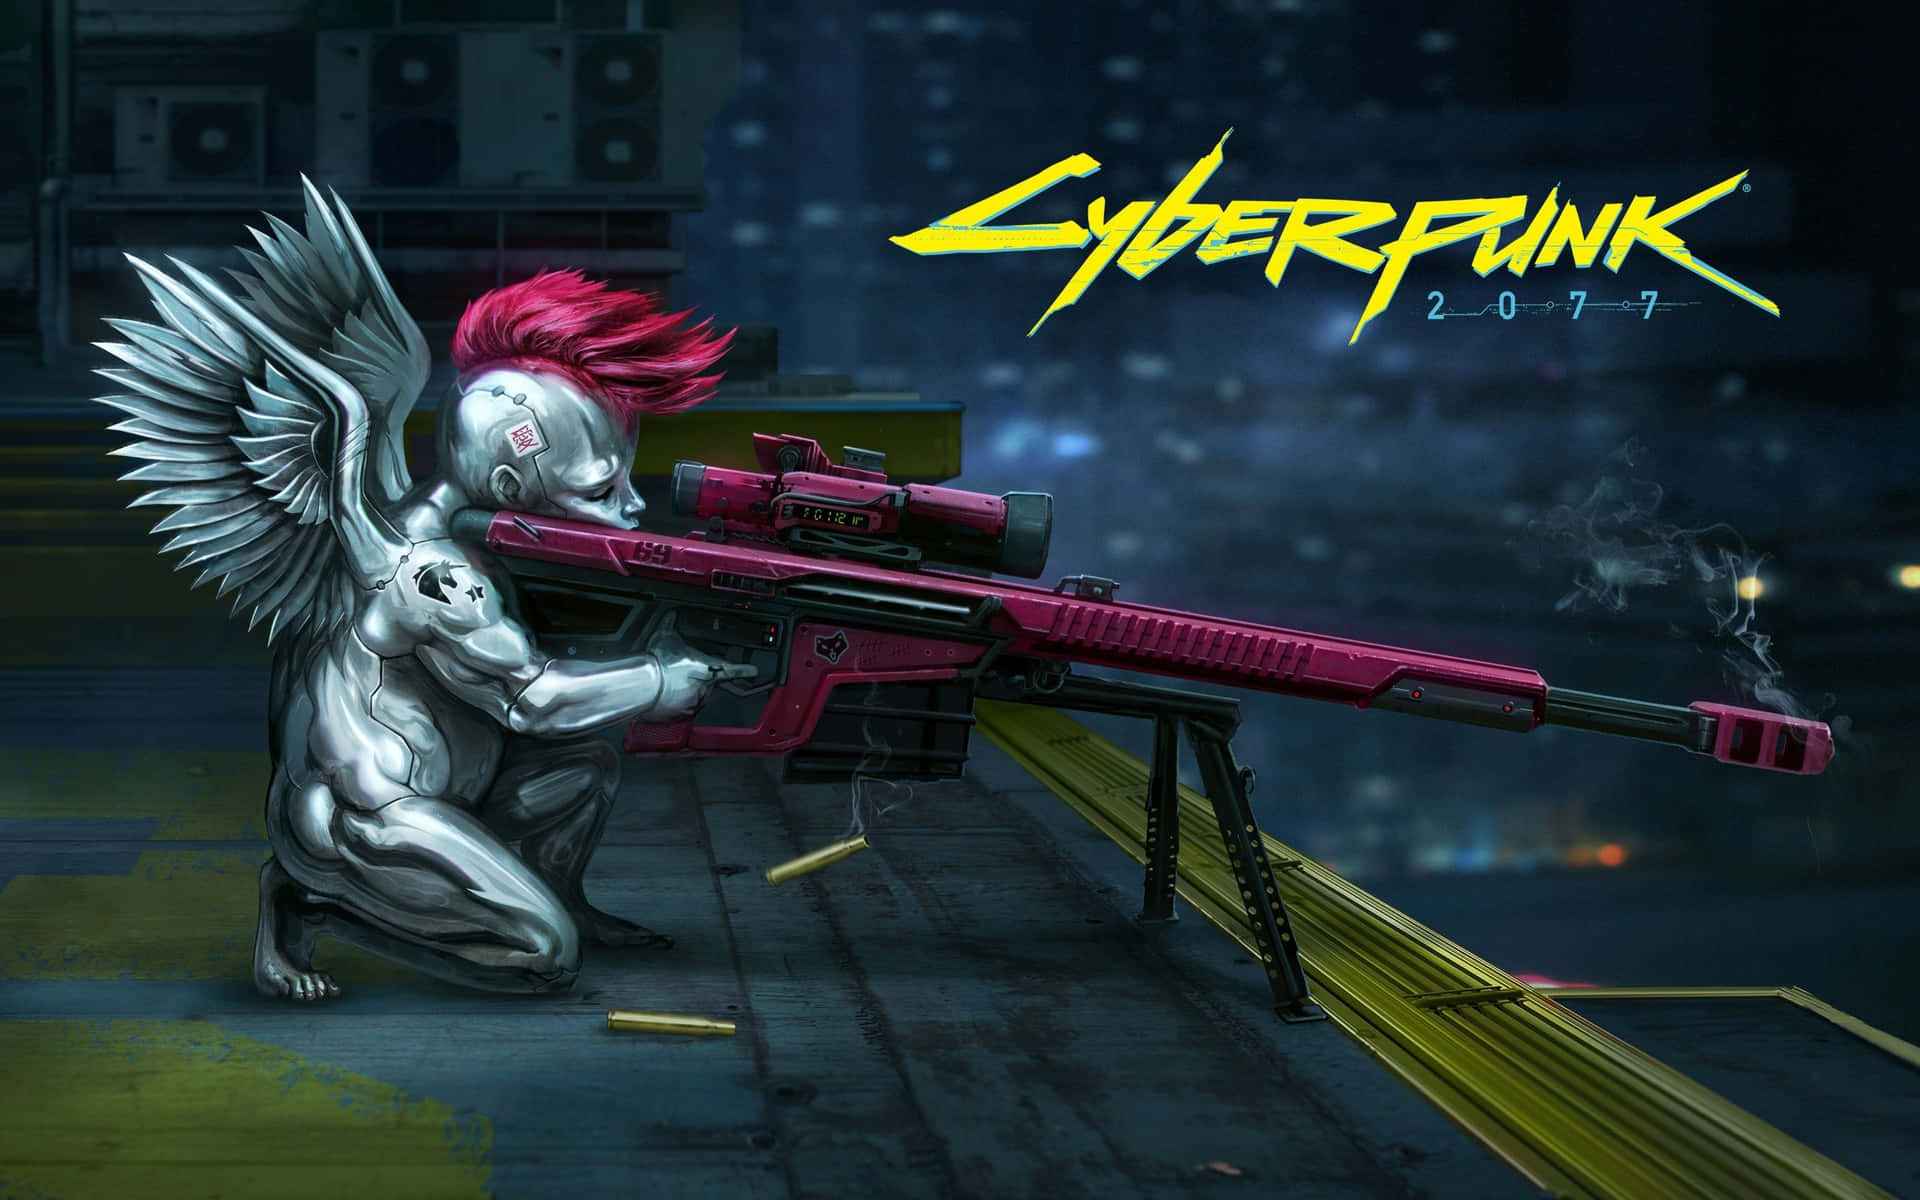 Cyberpunk 2077 Characters in Action Wallpaper